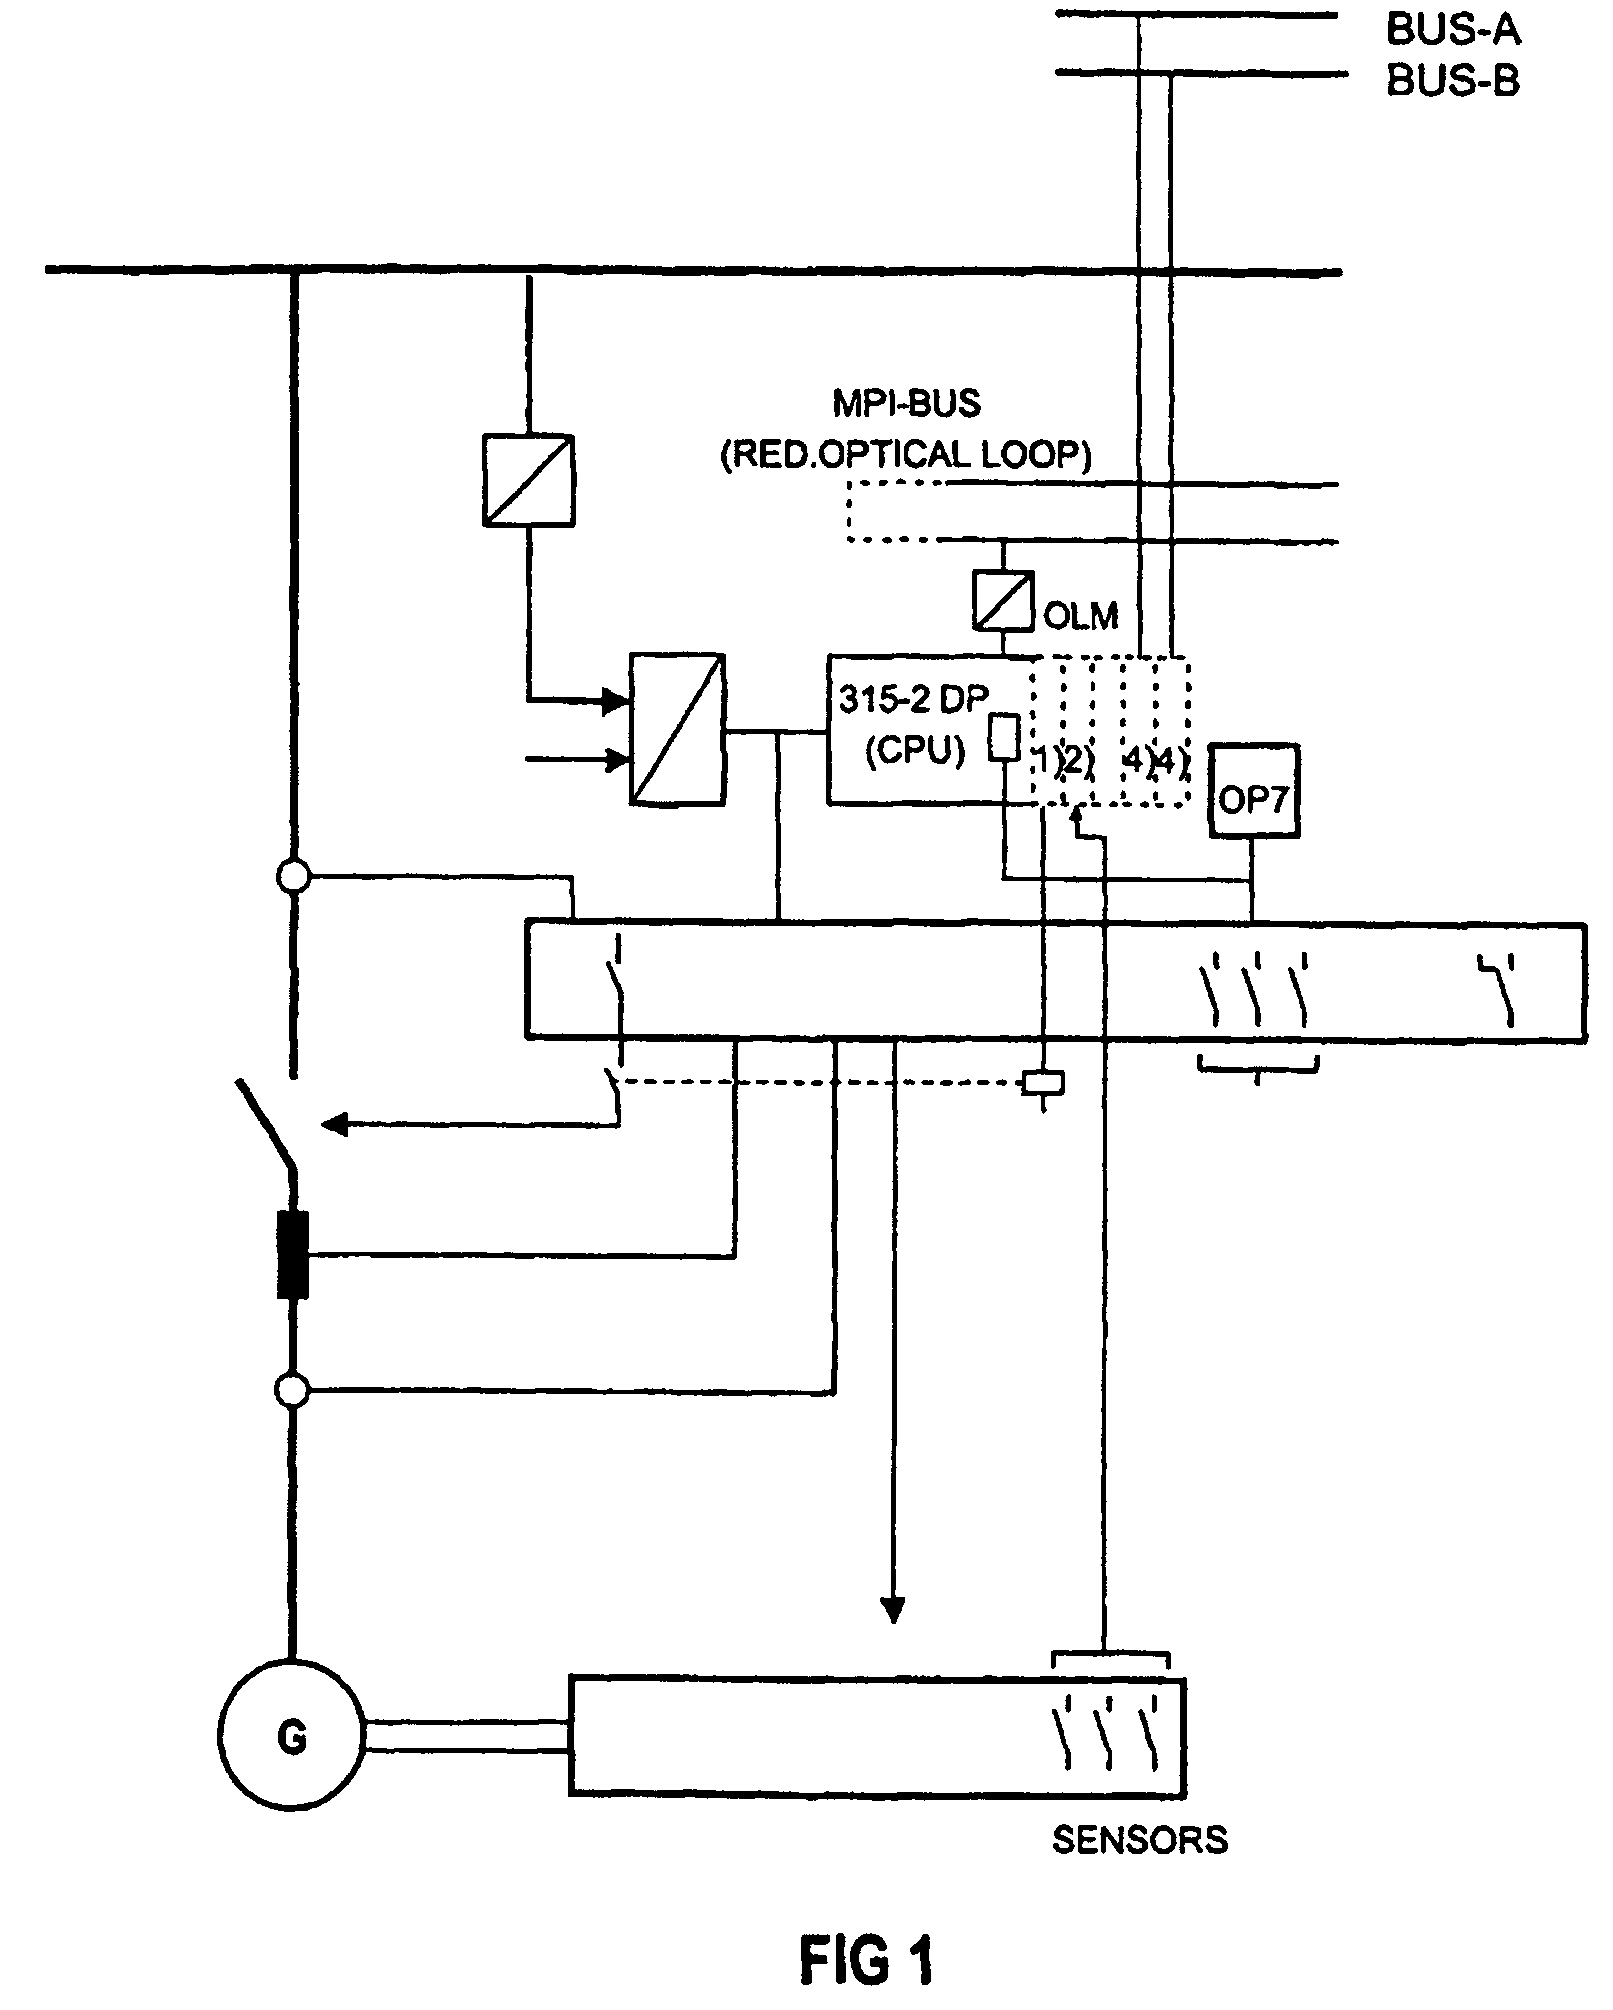 Electrical system for a ship